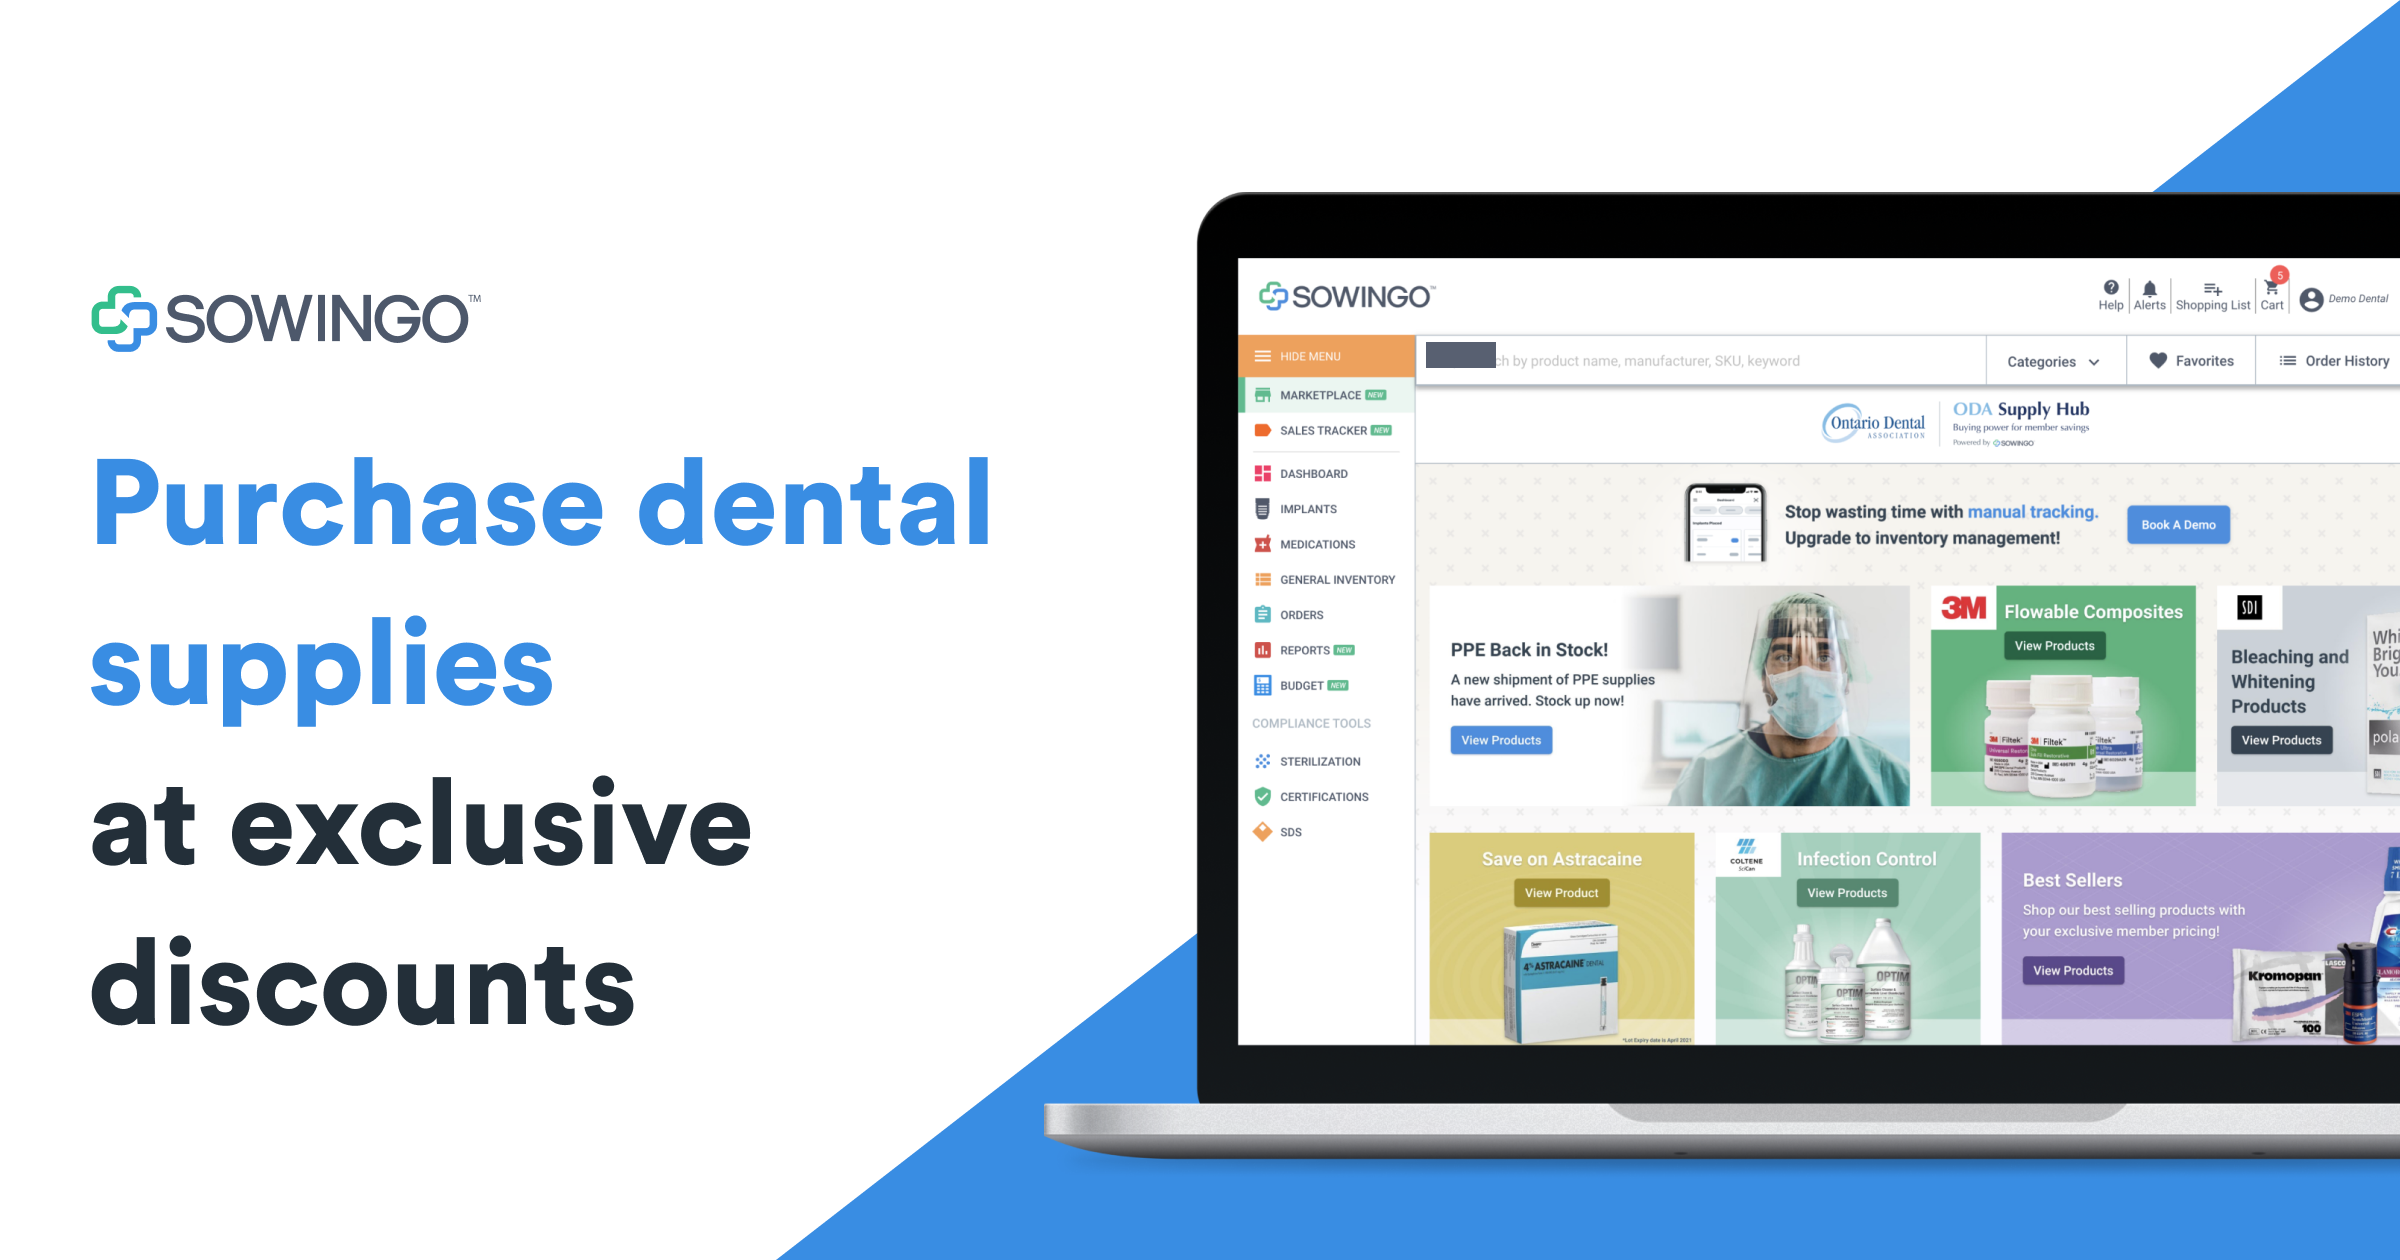 Sowingo Software - Whether you operate a dental, dental specialist or medical office, Sowingo will help you save time and money with an integrated shopping and inventory solution in one easy-to-use platform.